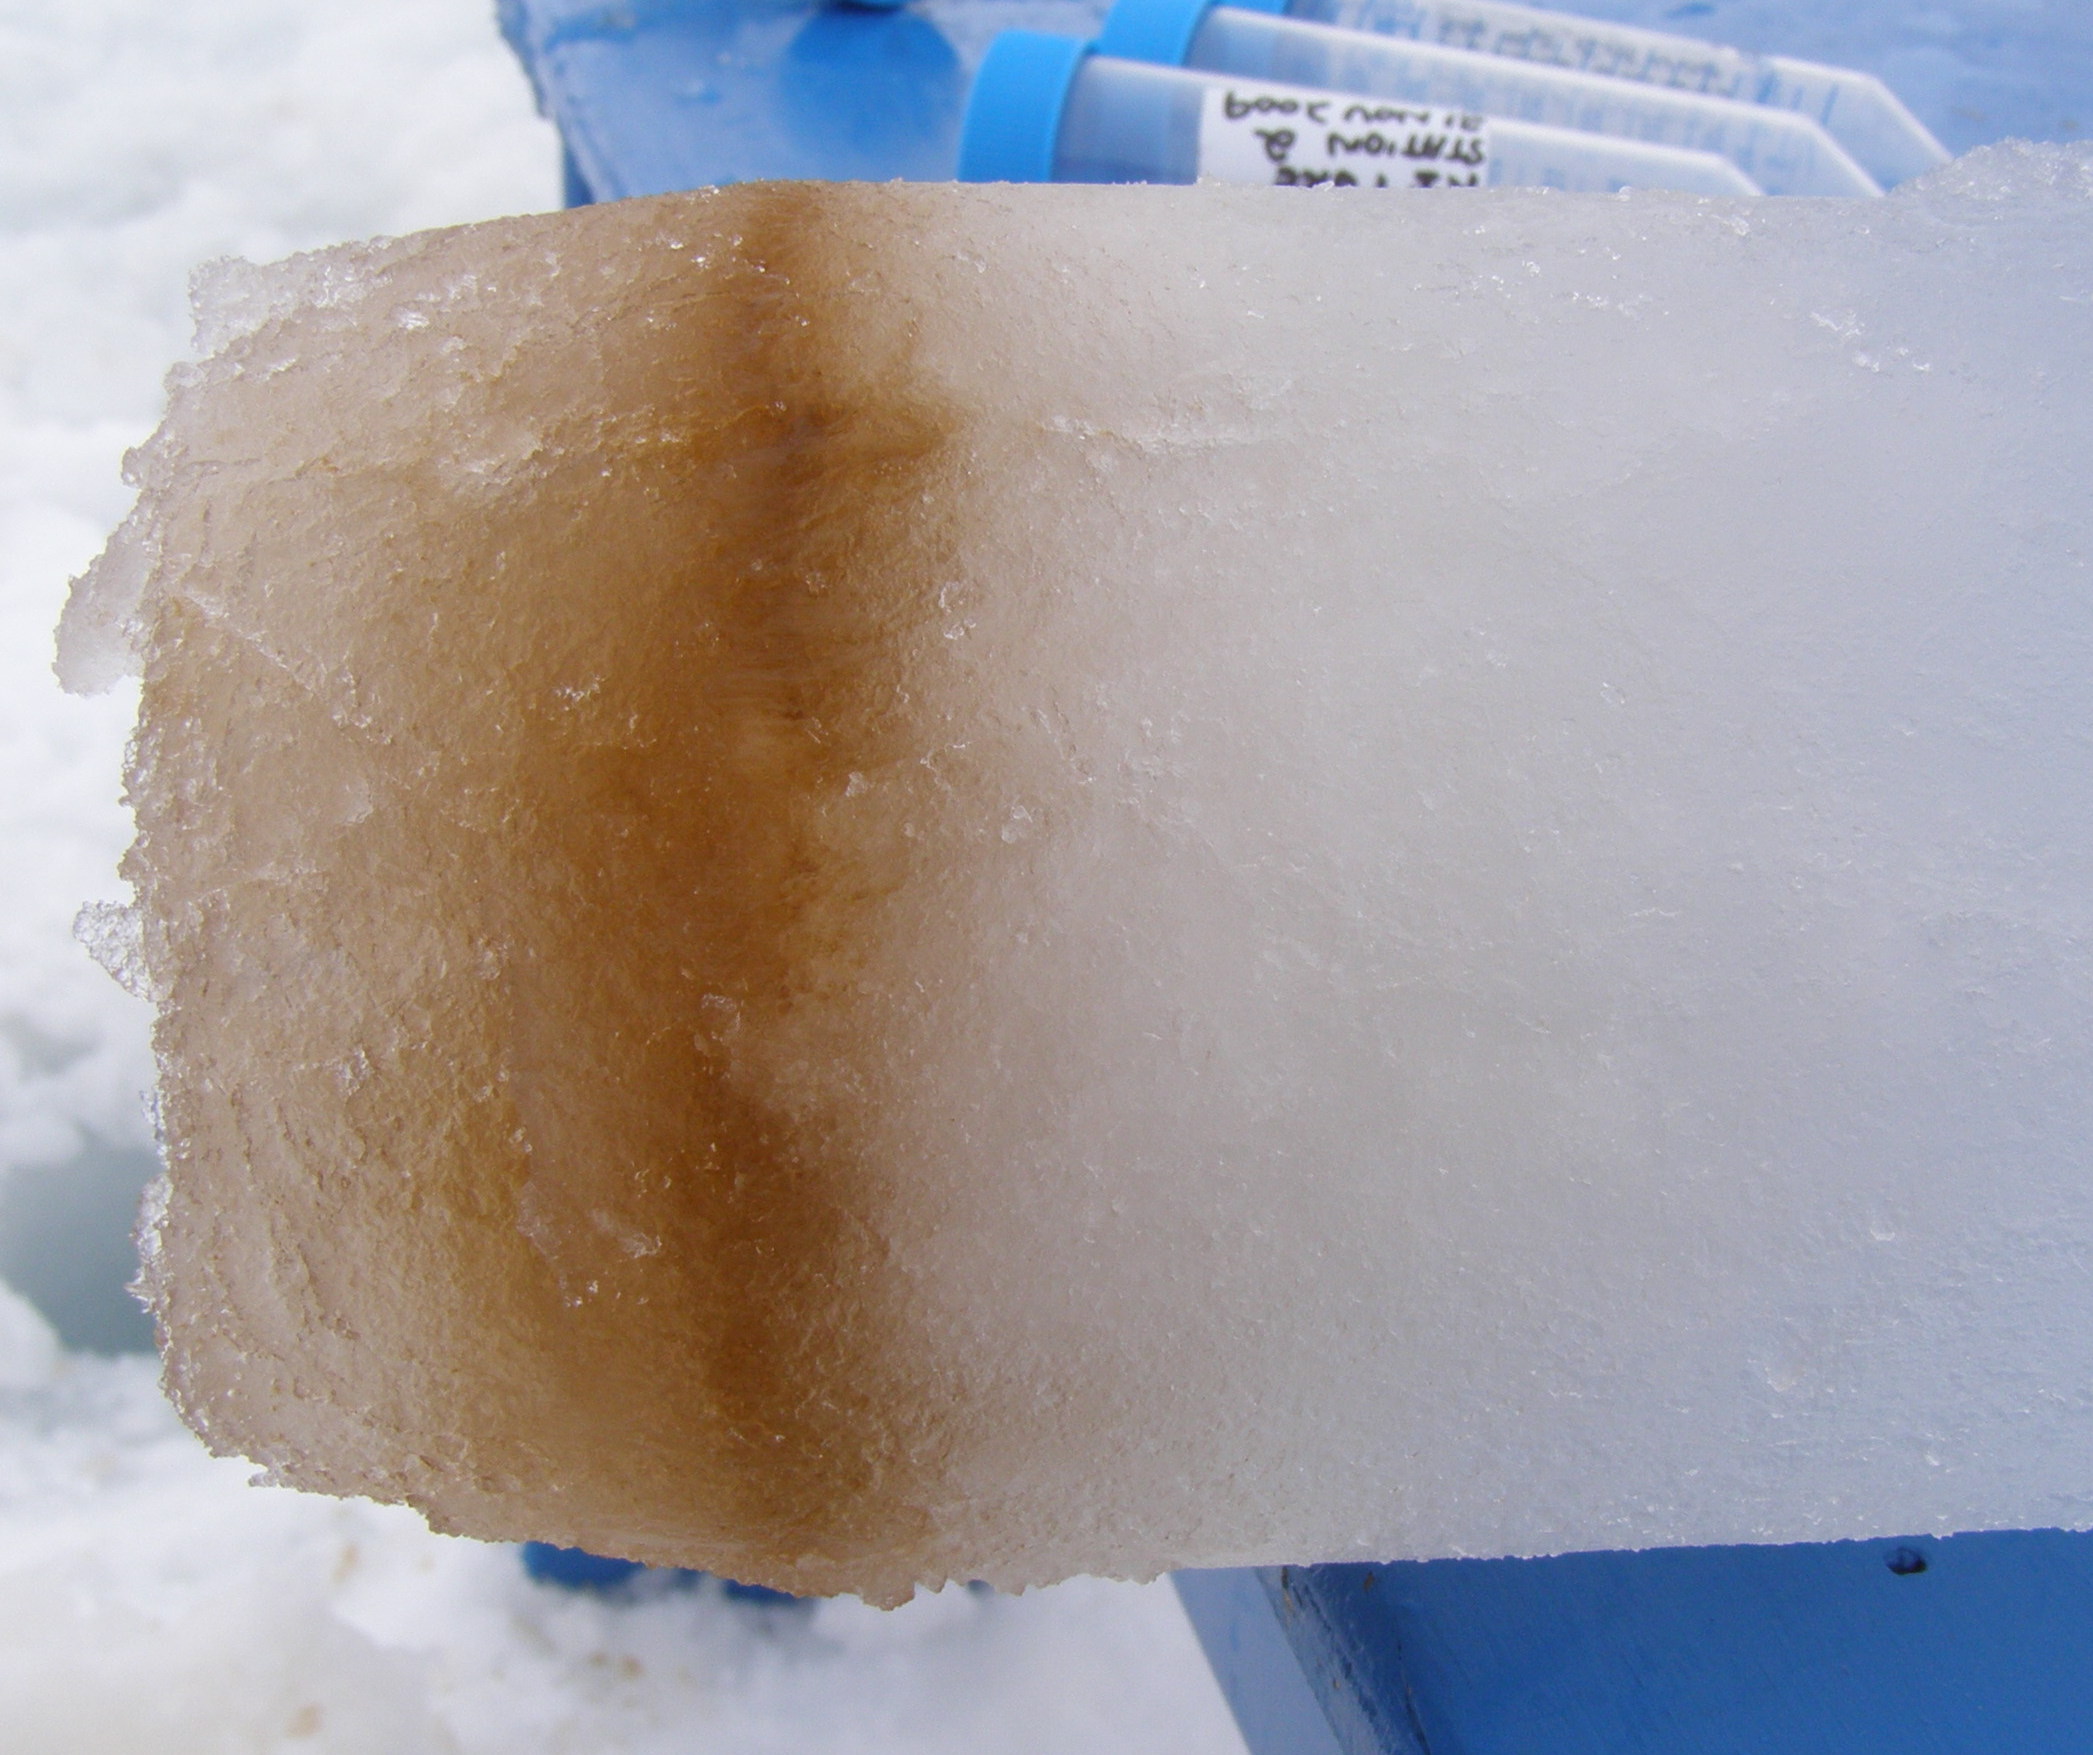 An ice core showing the diatoms growing on the bottom of the sea ice